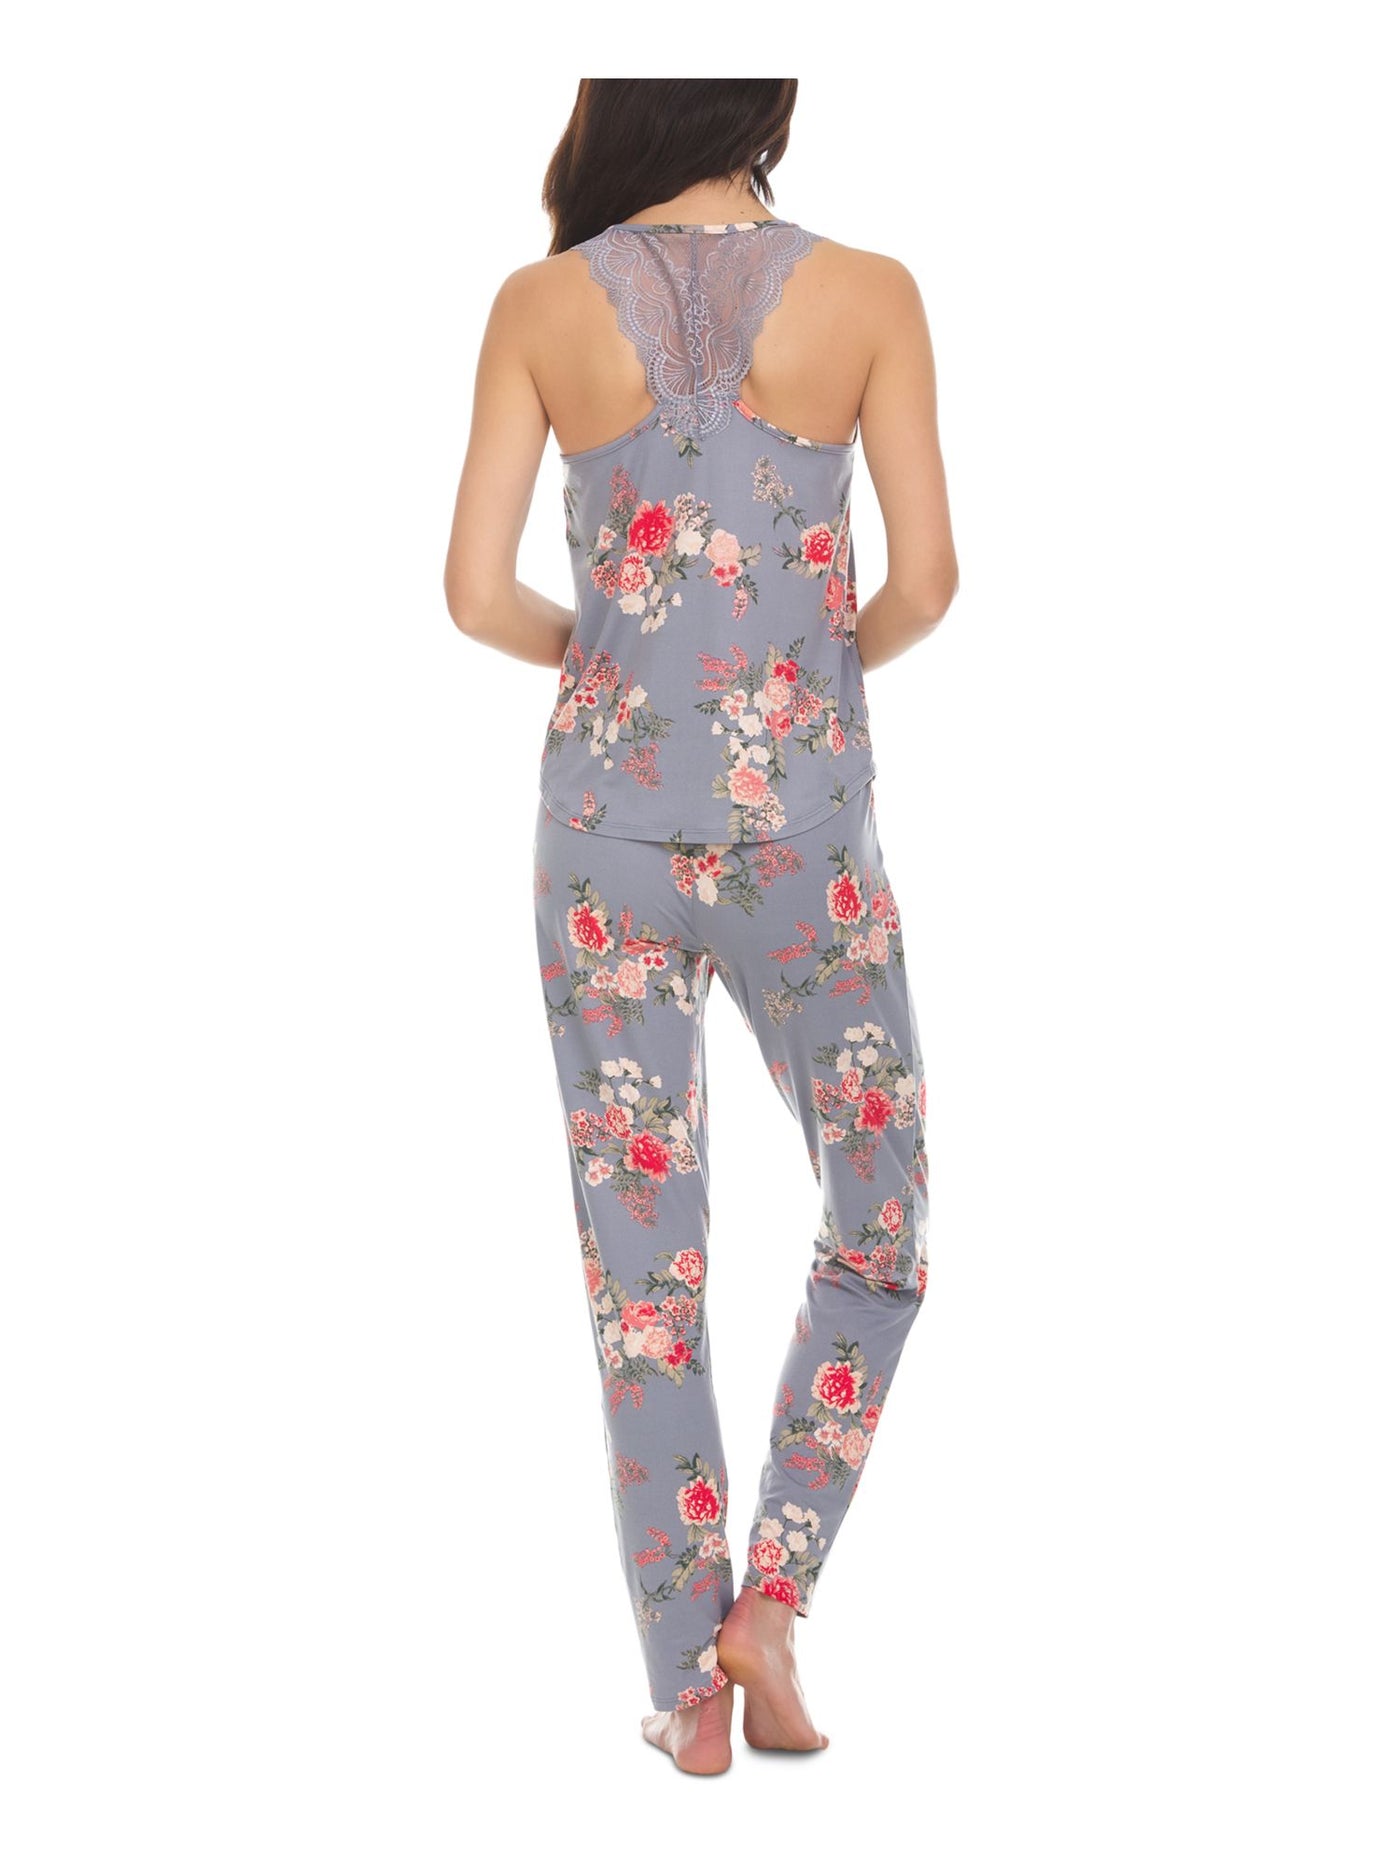 FLORA Intimates Gray Floral Everyday Juniors S